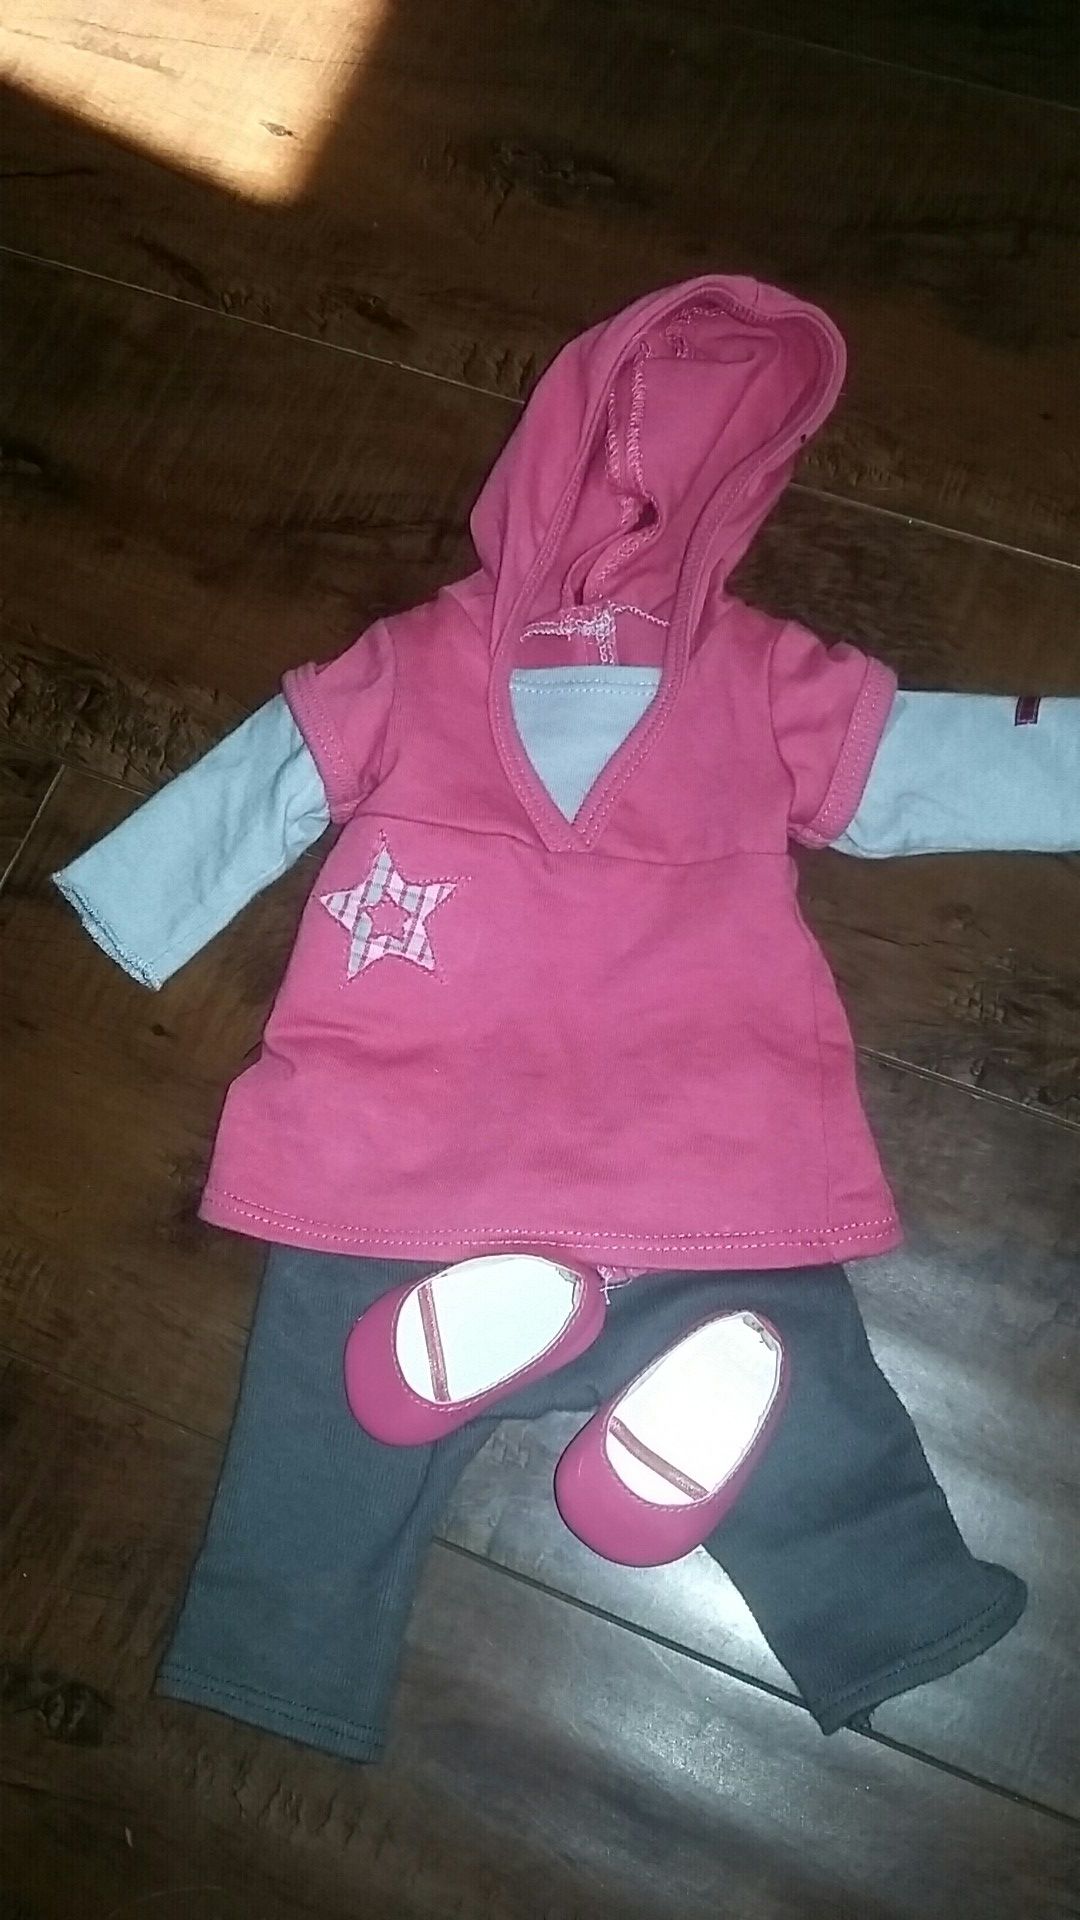 American Girl doll Outfit